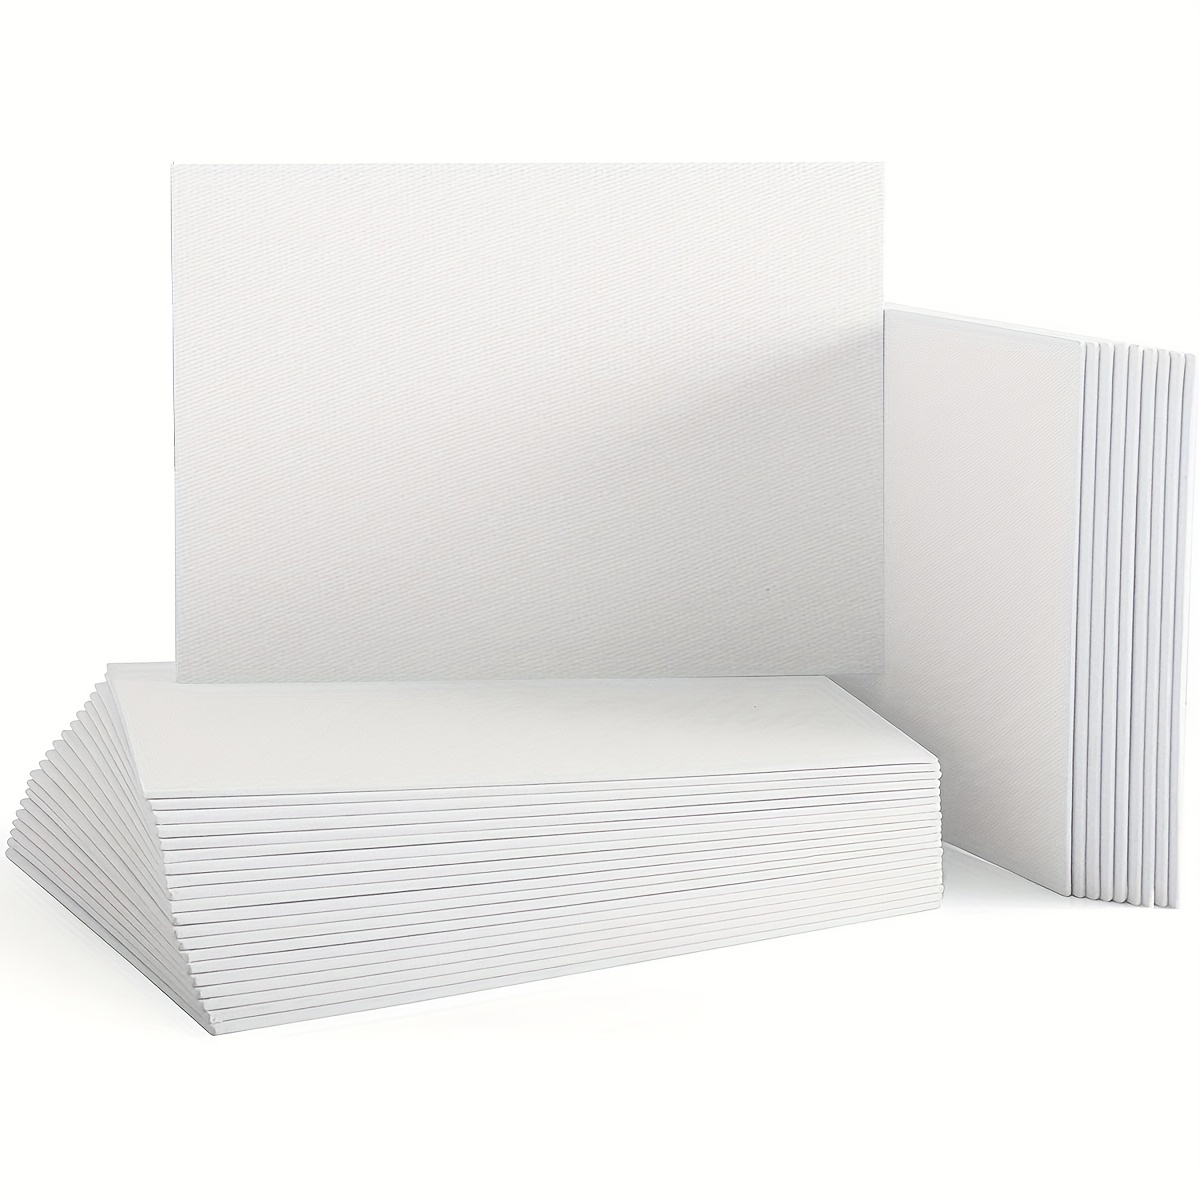 Pack of 4 Stretched Canvas for Painting 9x12 inch,24x30cm Primed White 100%  Cotton Artist Blank Canvas Boards 8 oz Gesso-Primed